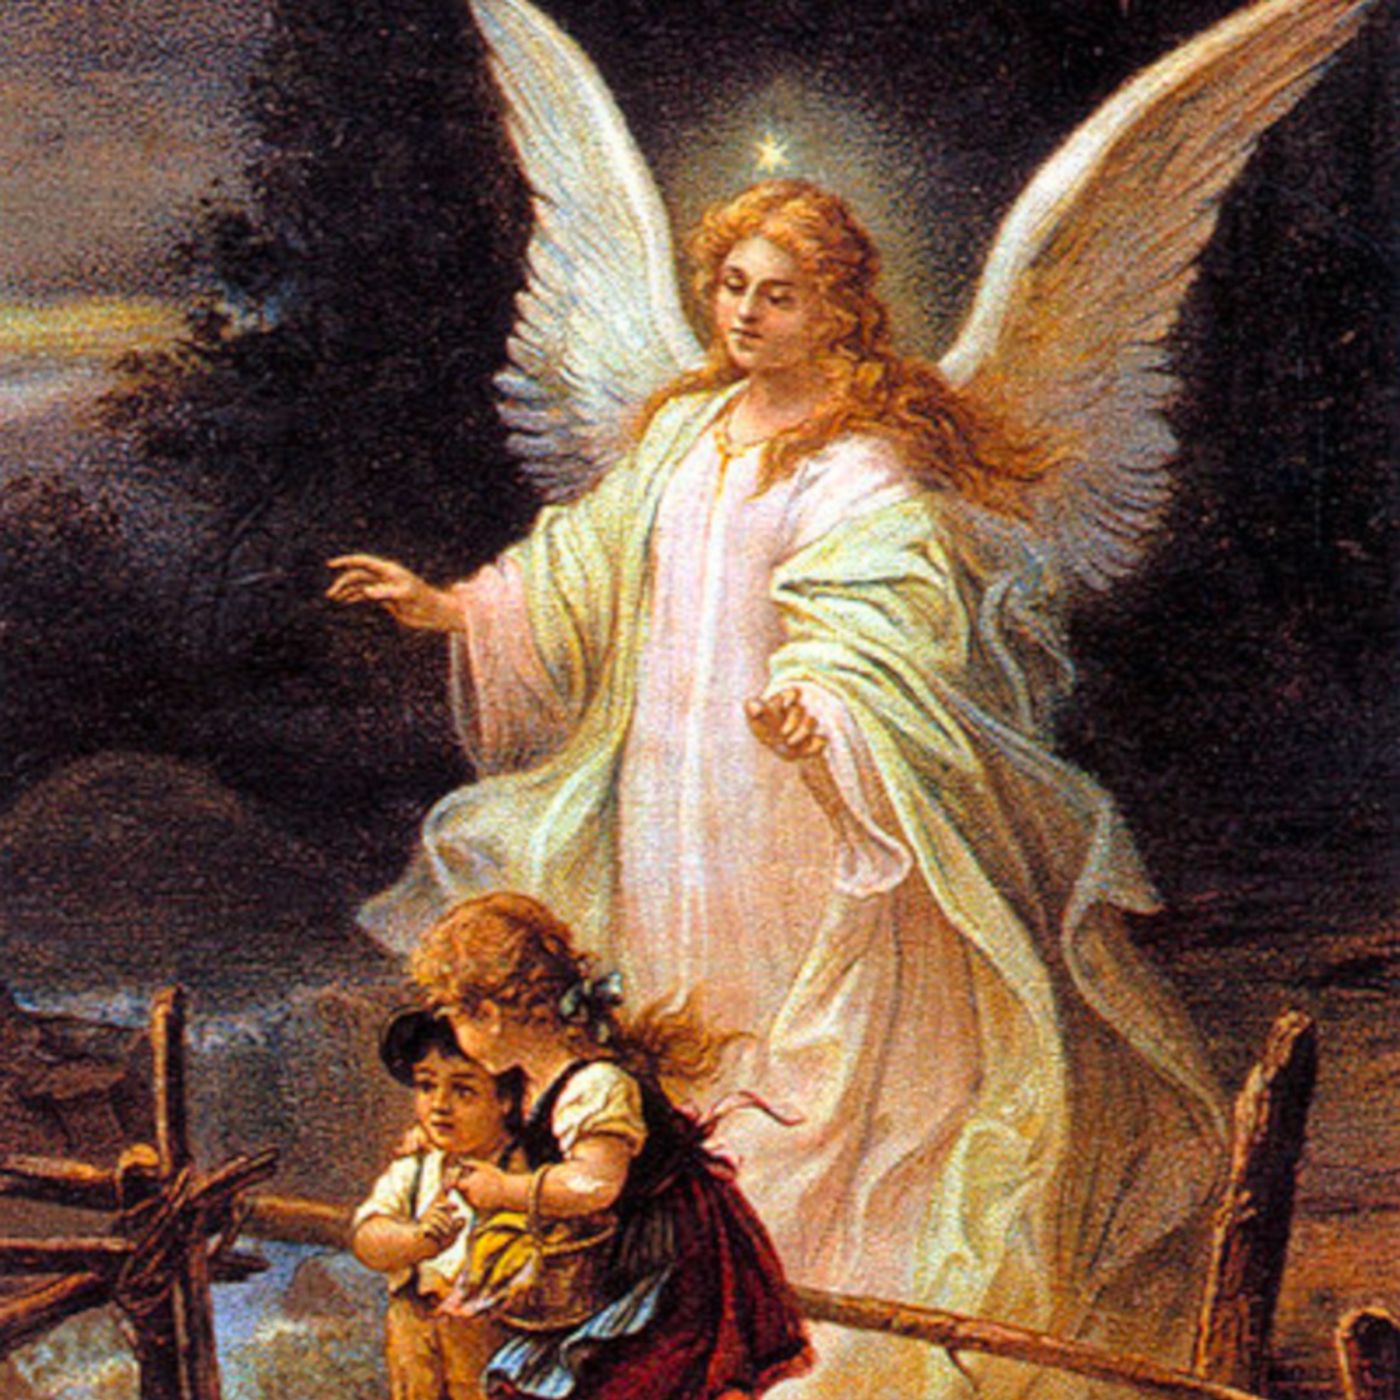 October 2: The Holy Guardian Angels